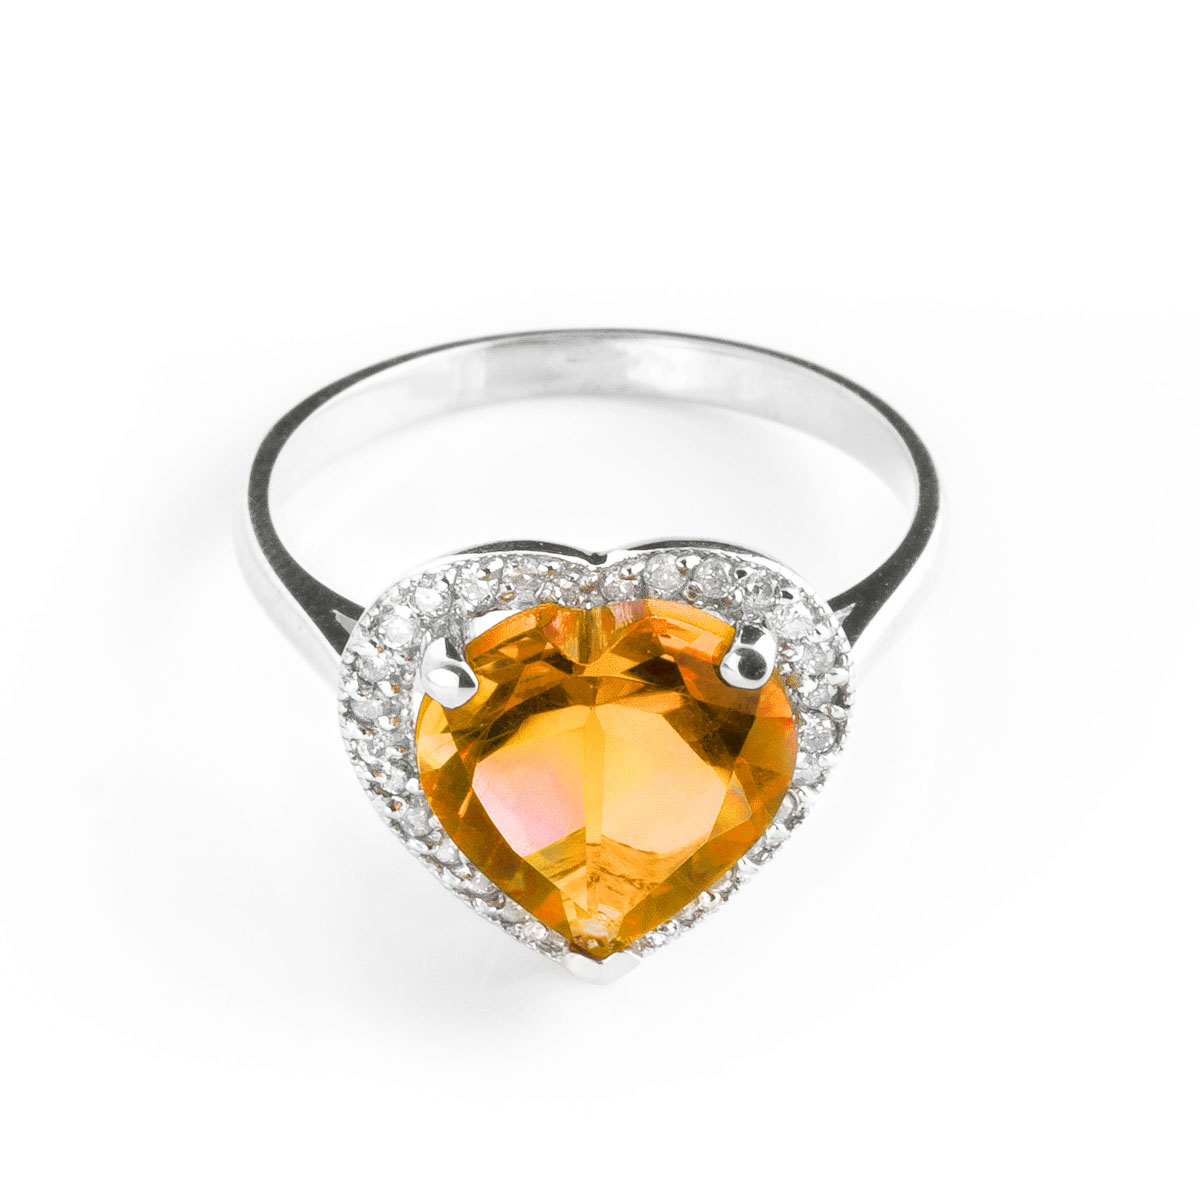 Citrine Halo Ring 3.24 ctw in 9ct White Gold